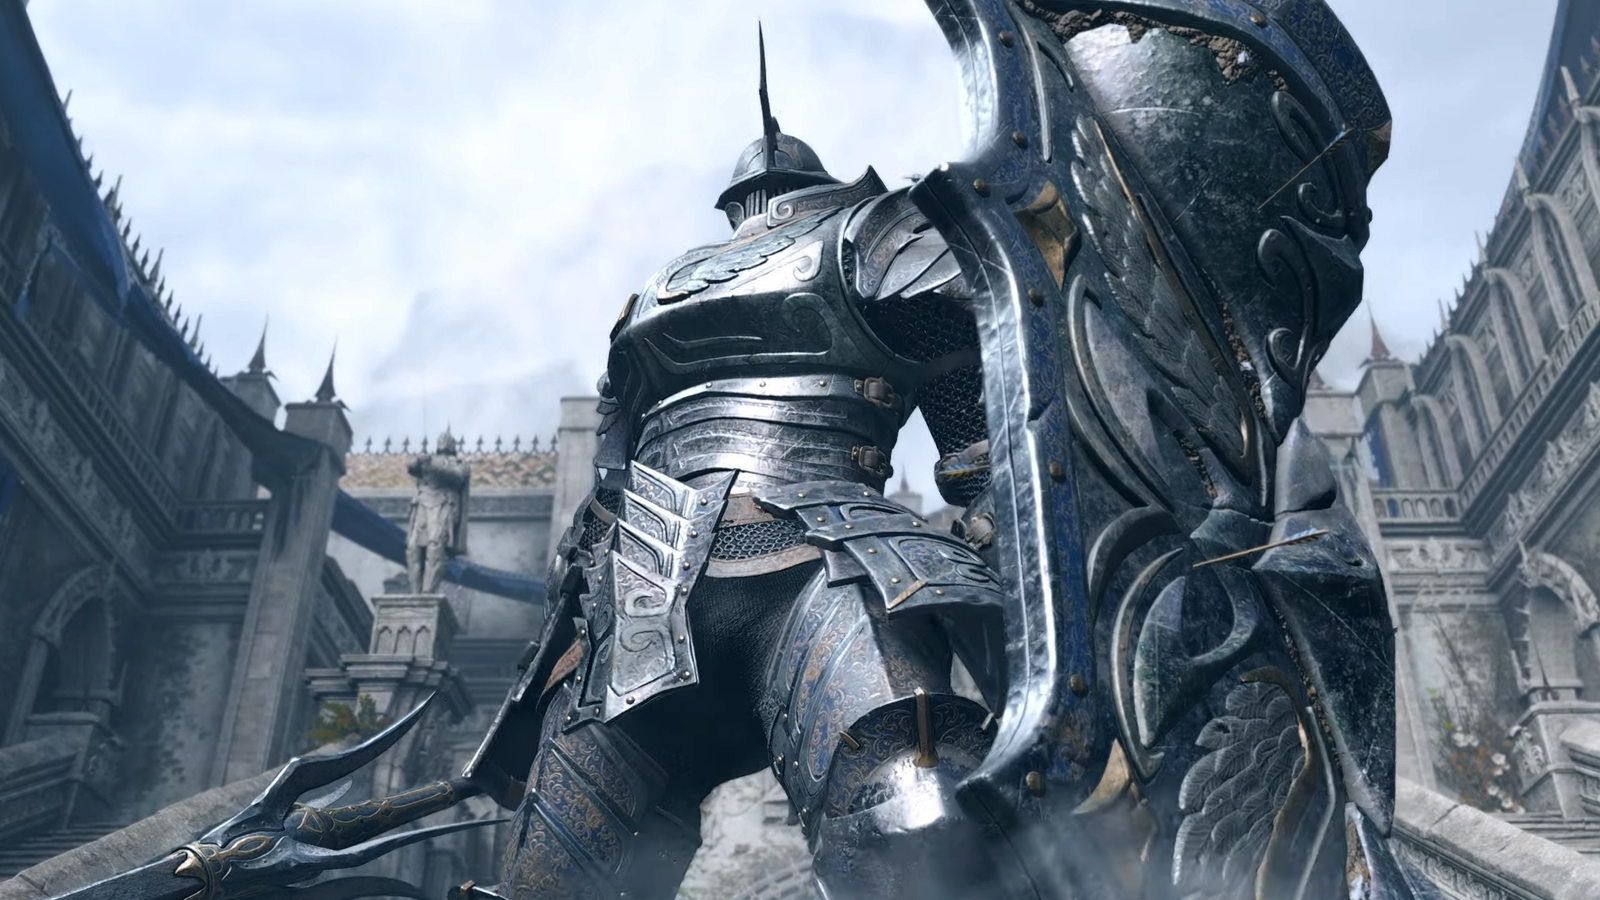 Demon's Souls PS5: a remake worth waiting a generation for